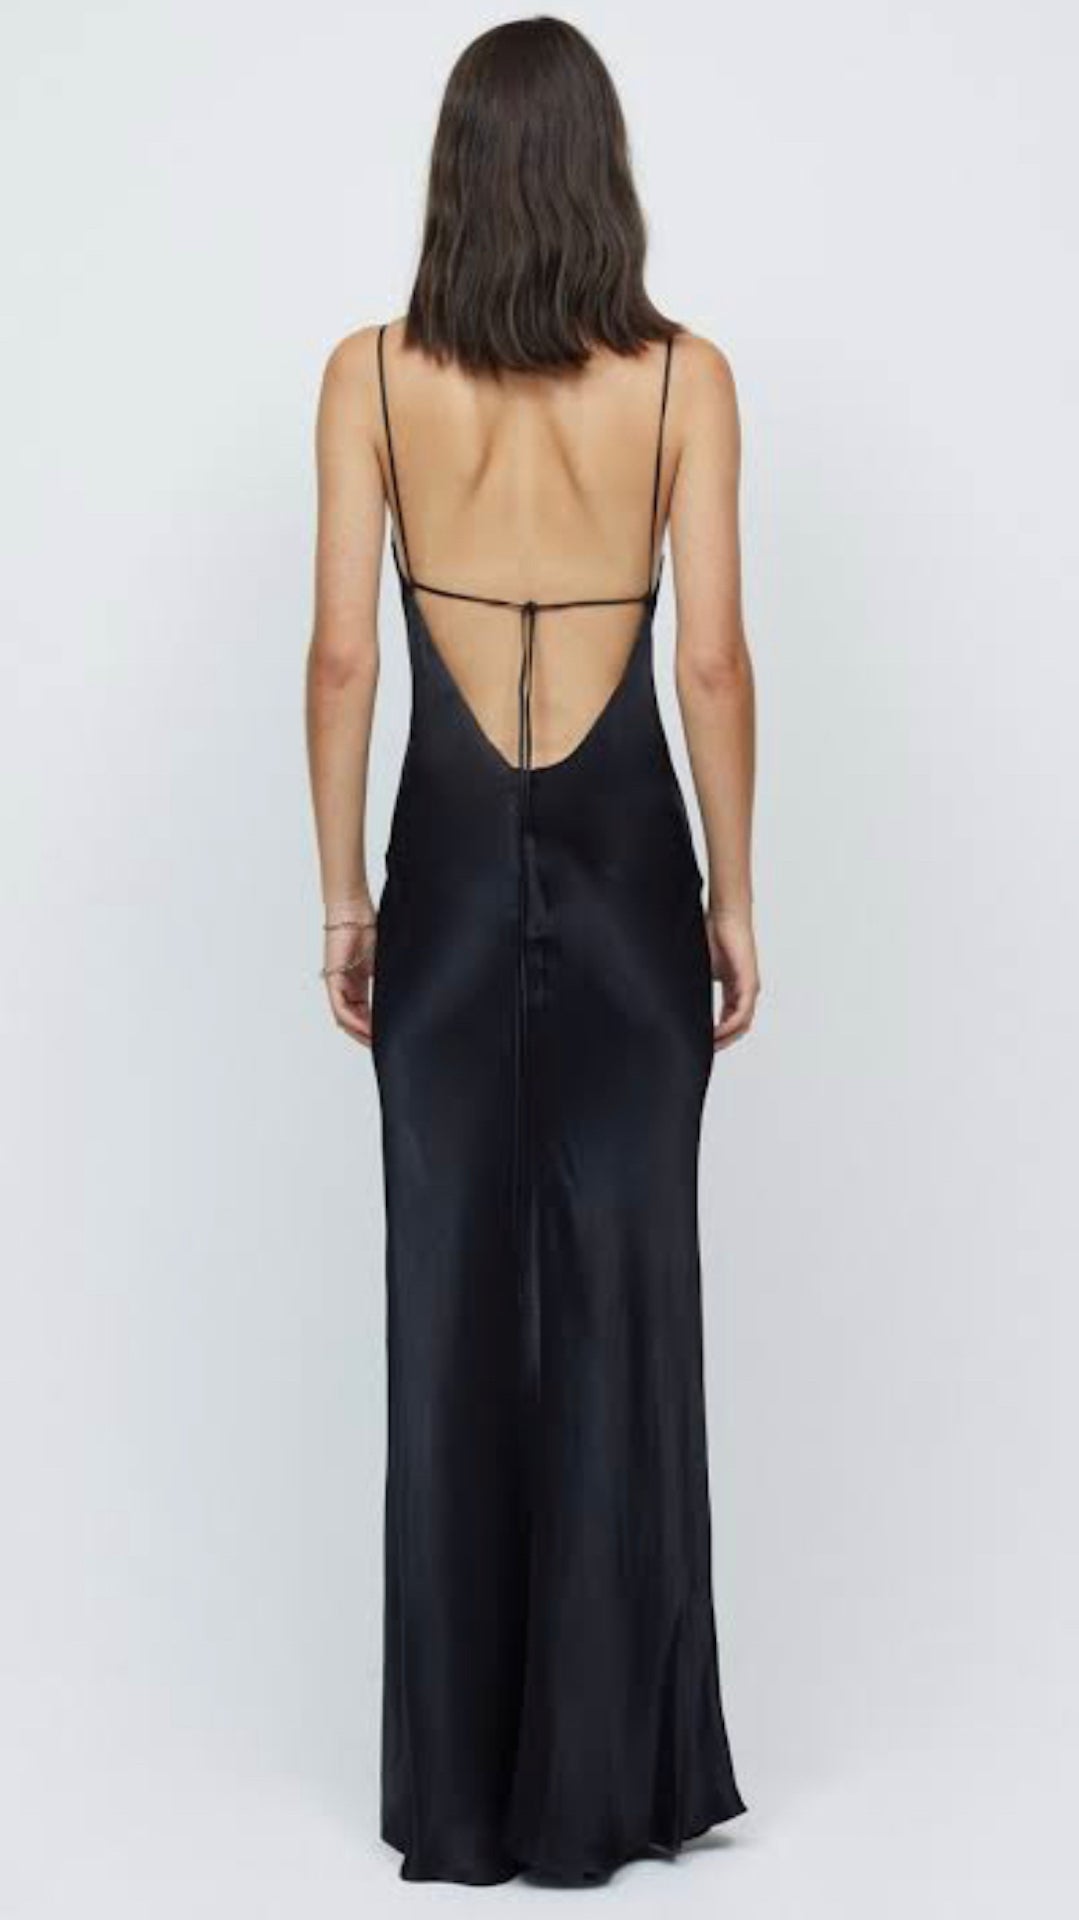 Bec & Bridge Black ball dress with open back and tie detail. Image of back view